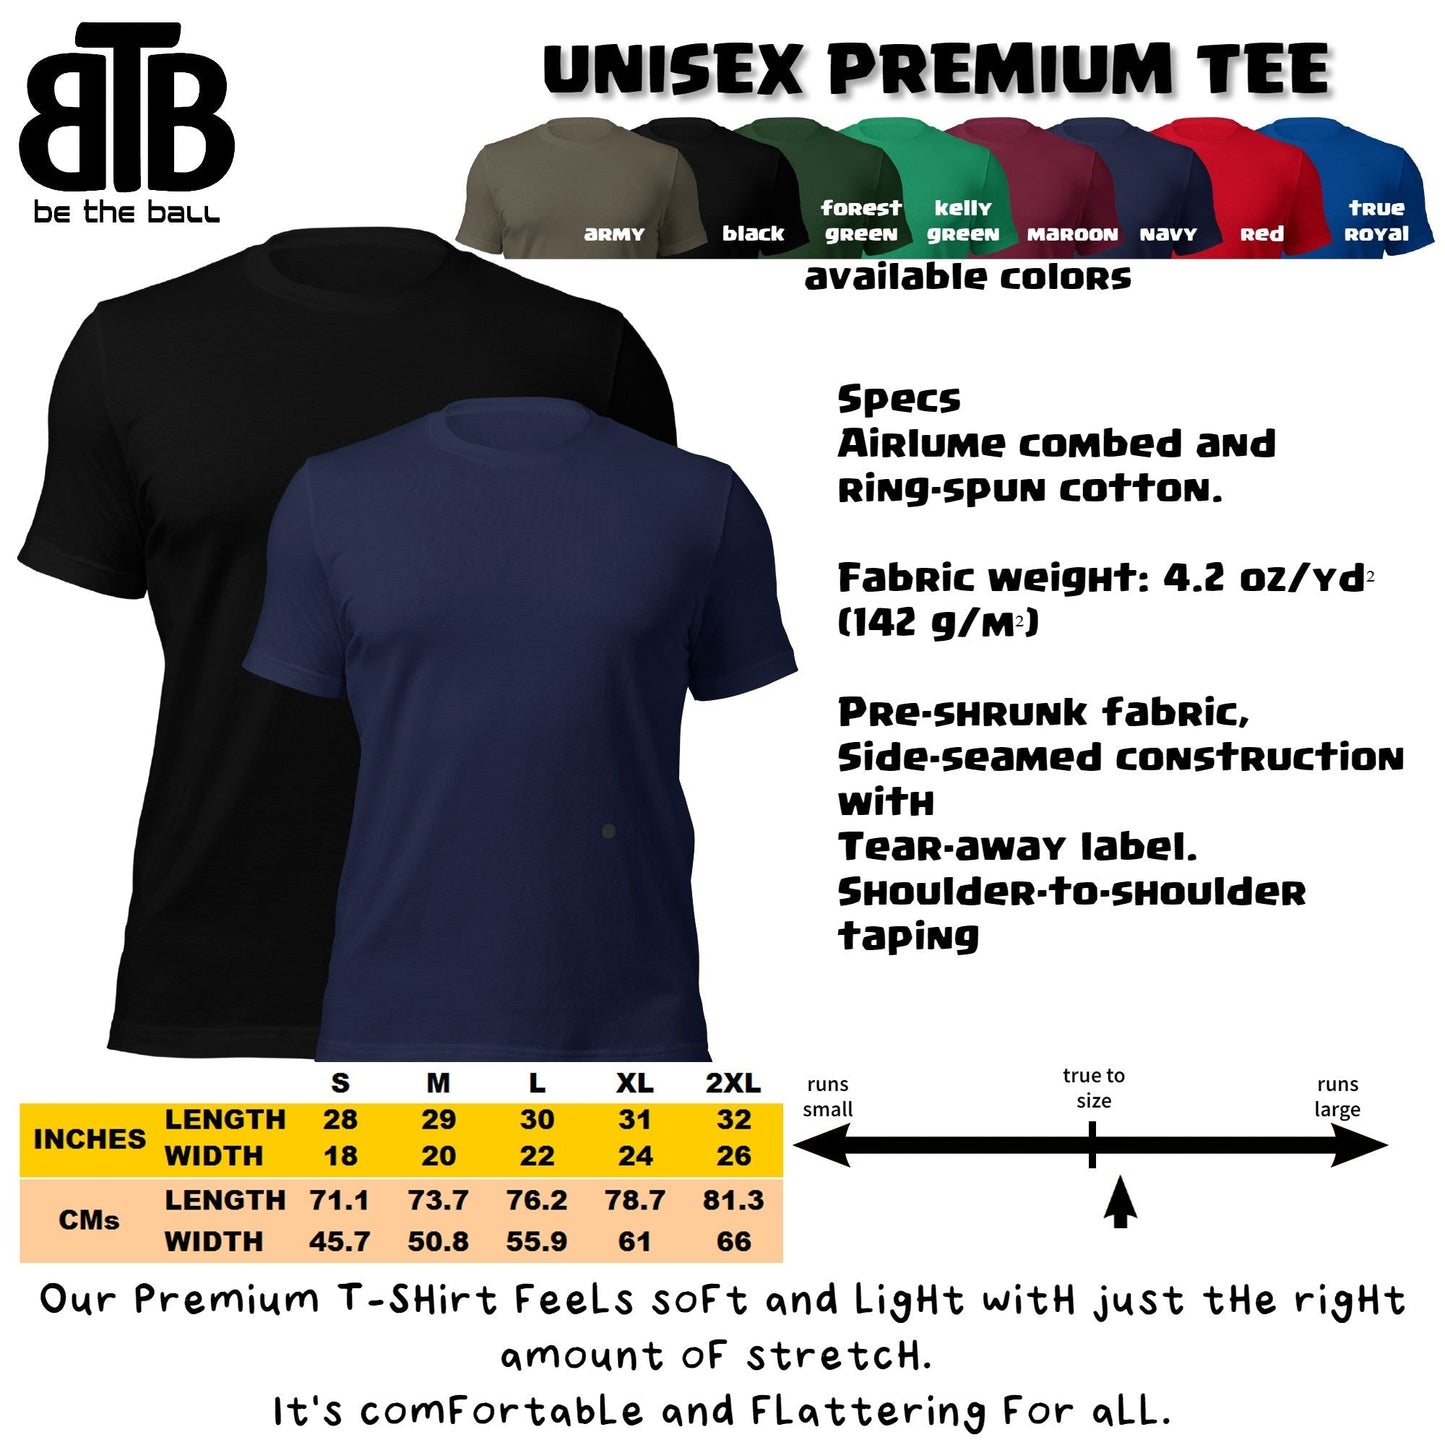 Time to Play Golf TShirt and Hoodie is a Creative Golf Graphic design for Men and Women